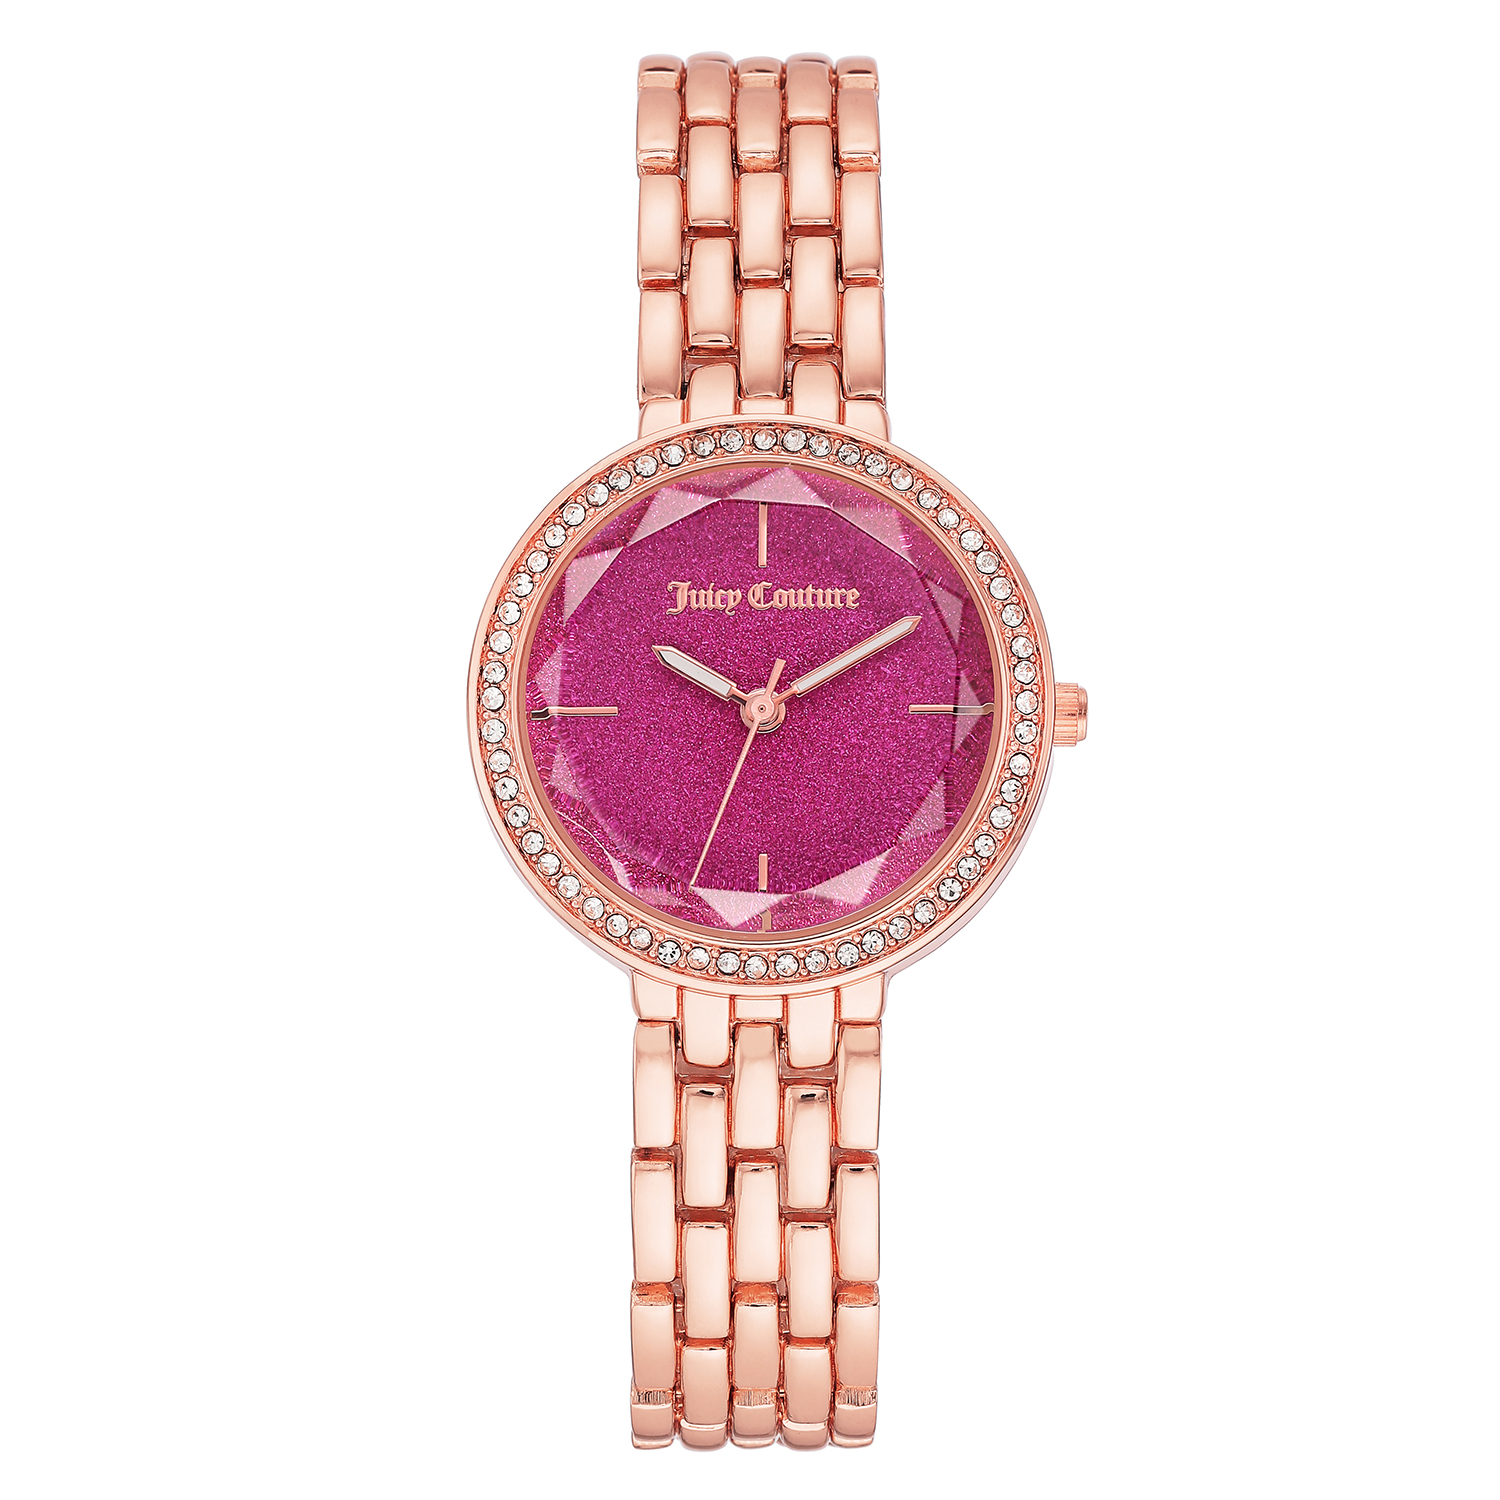 Juicy Couture Uhr JC/1208HPRG Damen Rose Gold